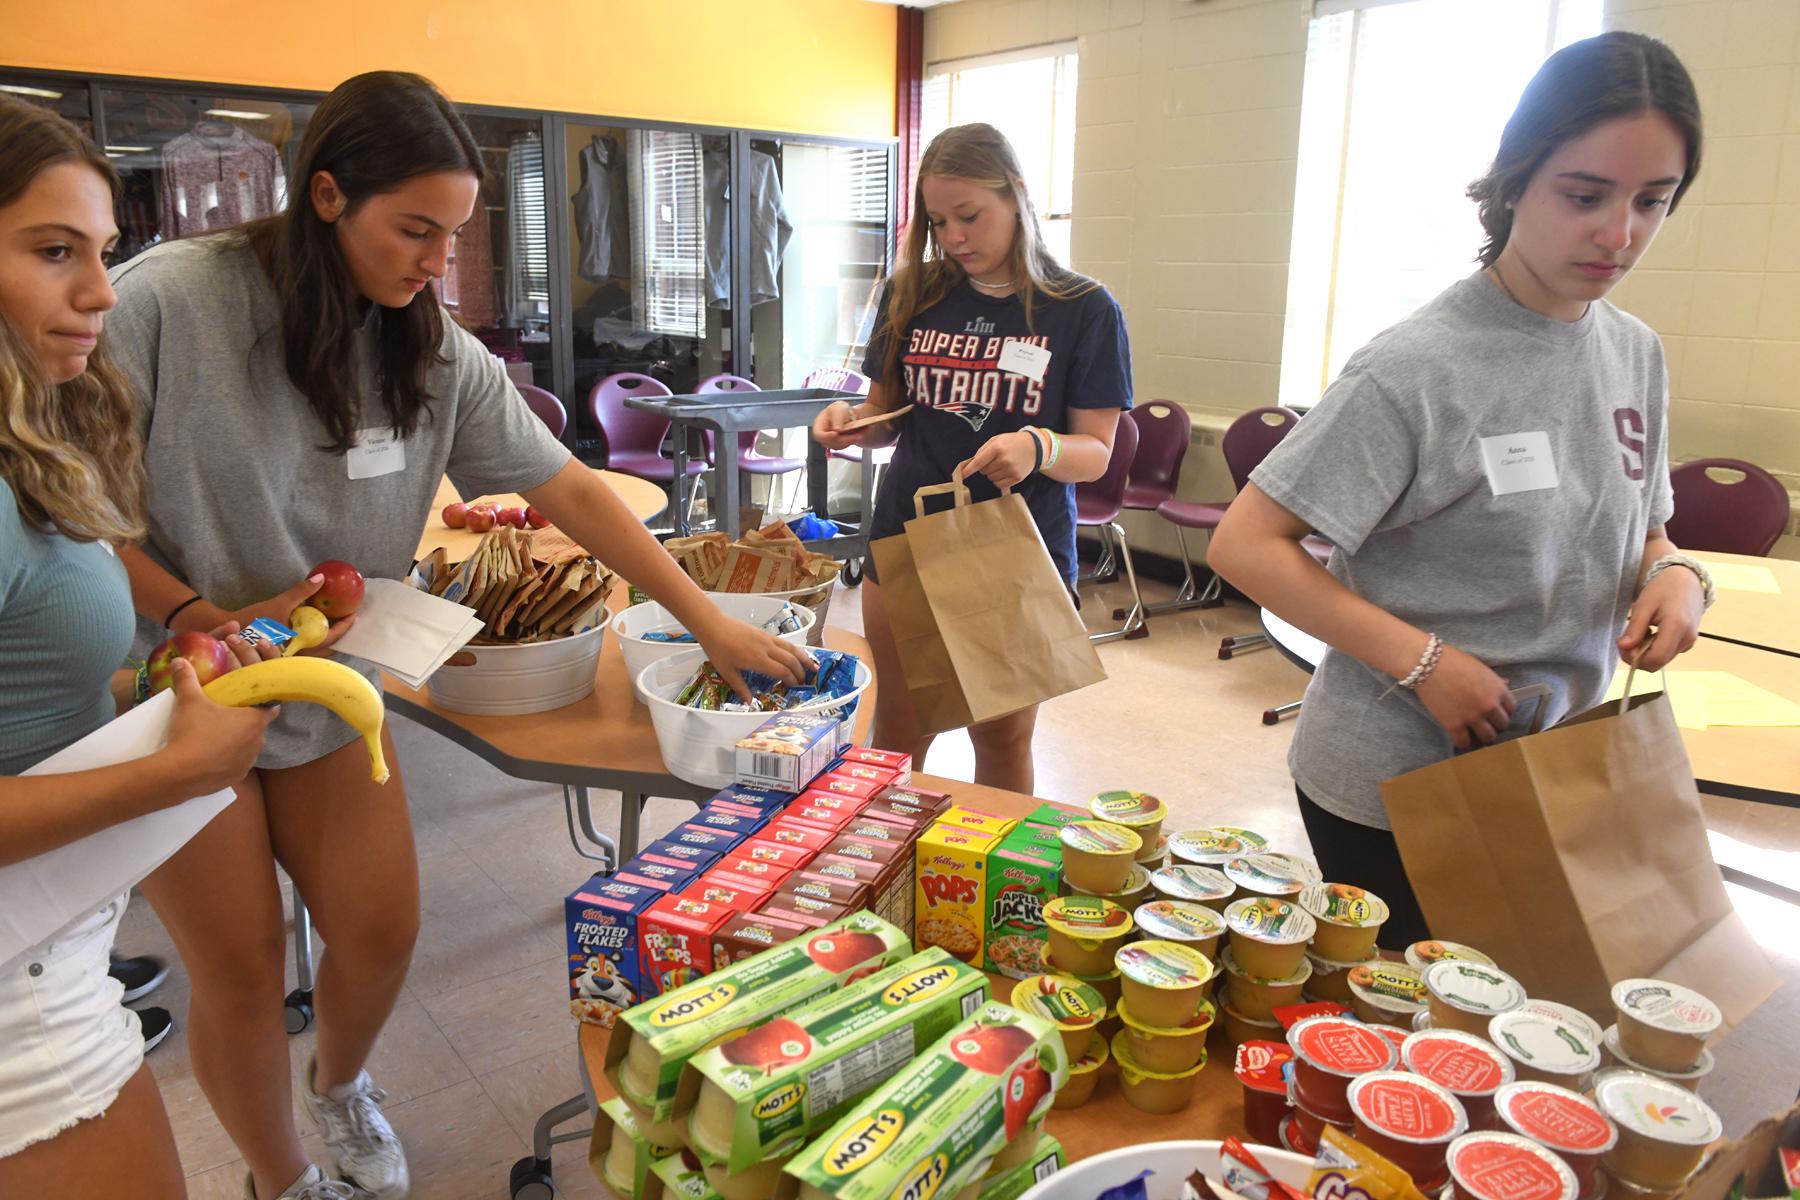 Trumbull’s St. Joseph High students take on community service projects